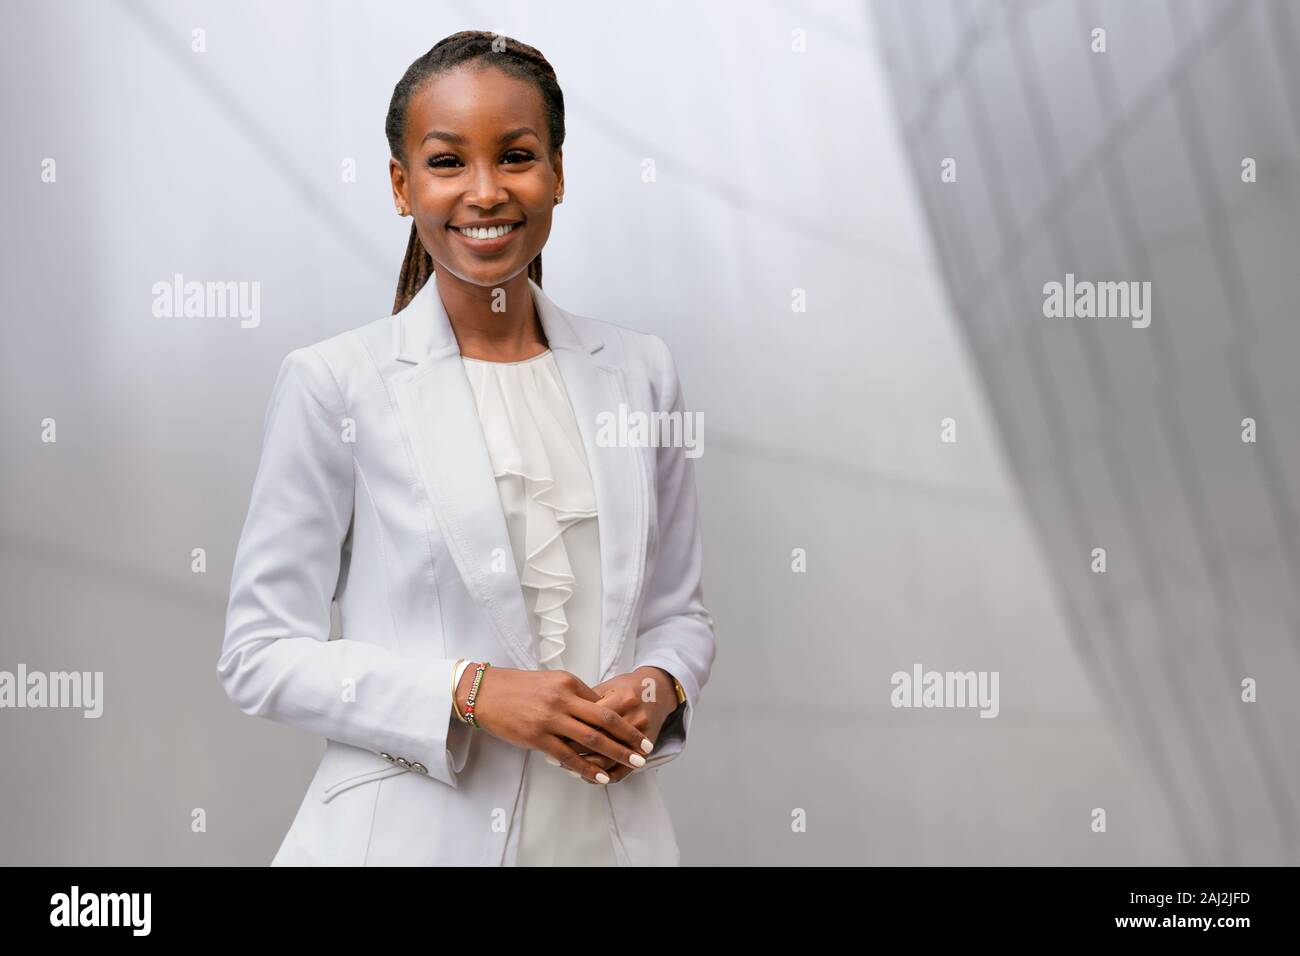 Headshot of an african american businesswoman, CEO, finance, law, attorney, legal, representative Stock Photo